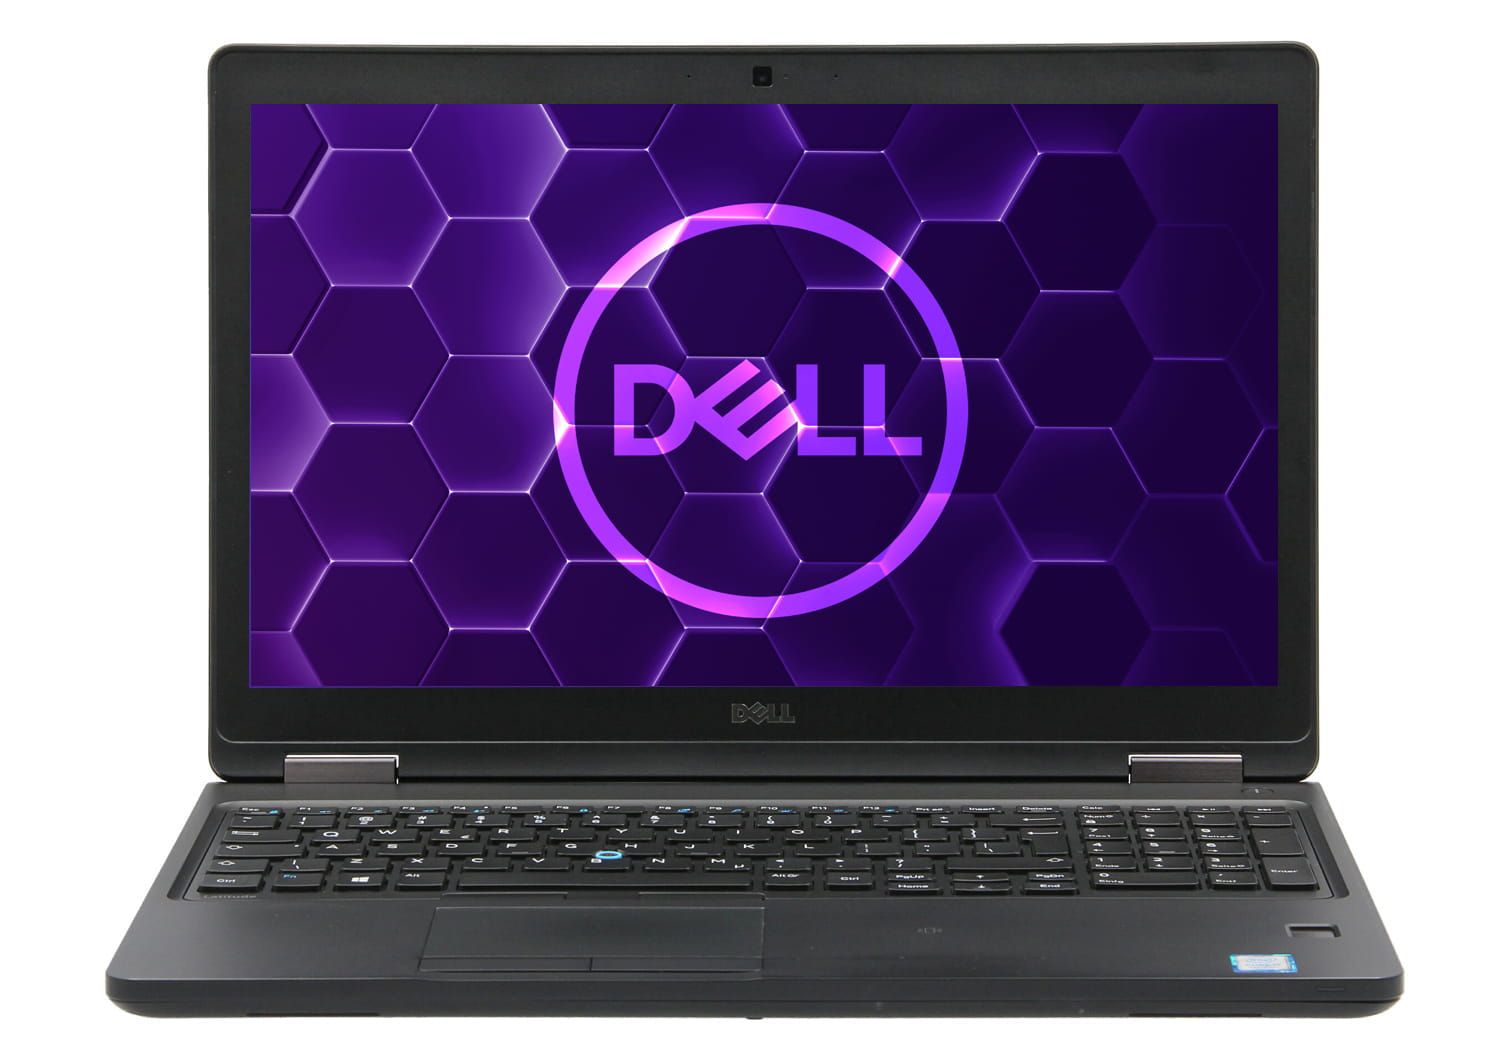 Laptop DELL Latitude 5580 | i7-7820HQ / FHD / 940 MX / US / OUTLET